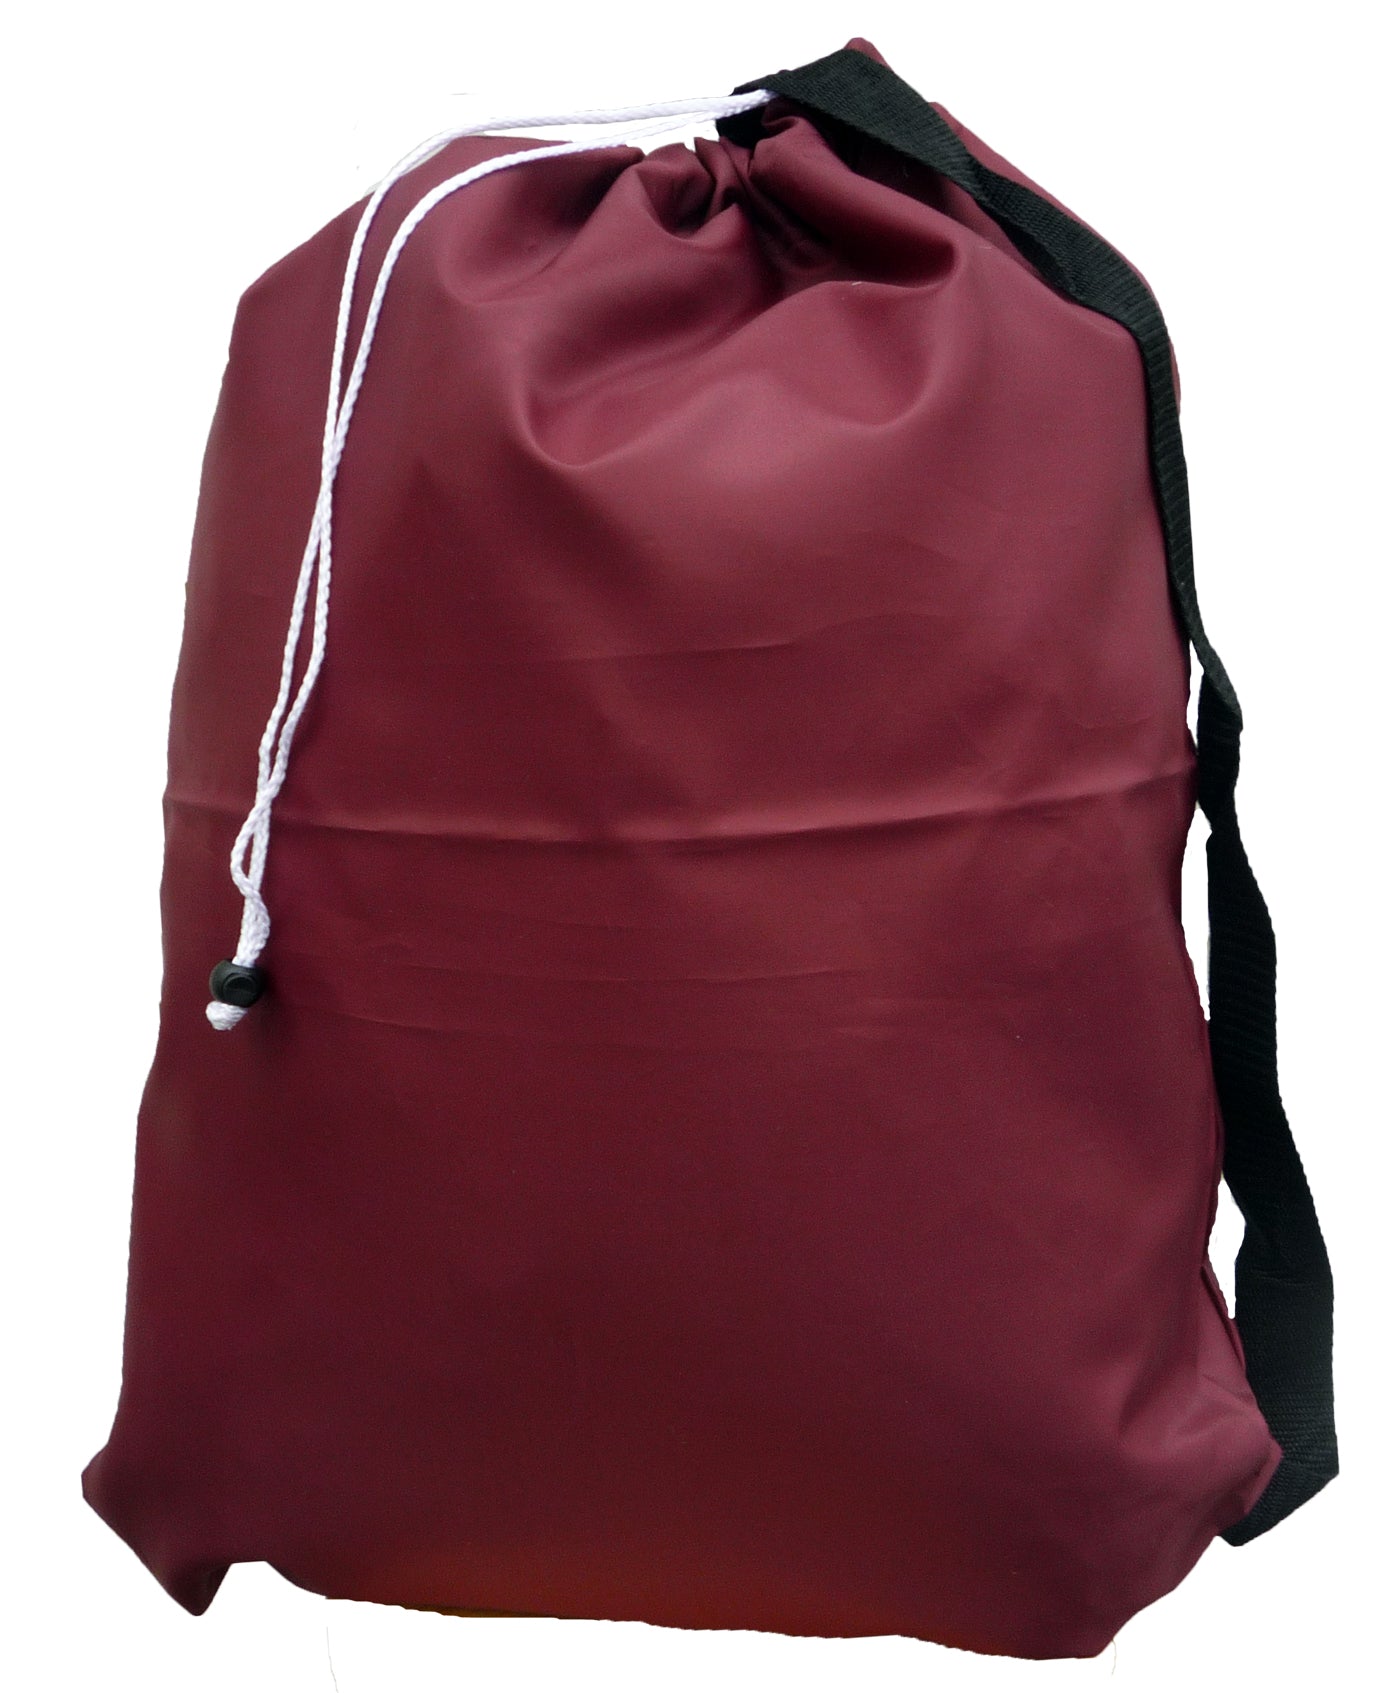 Large Laundry Bag with Strap, Burgundy